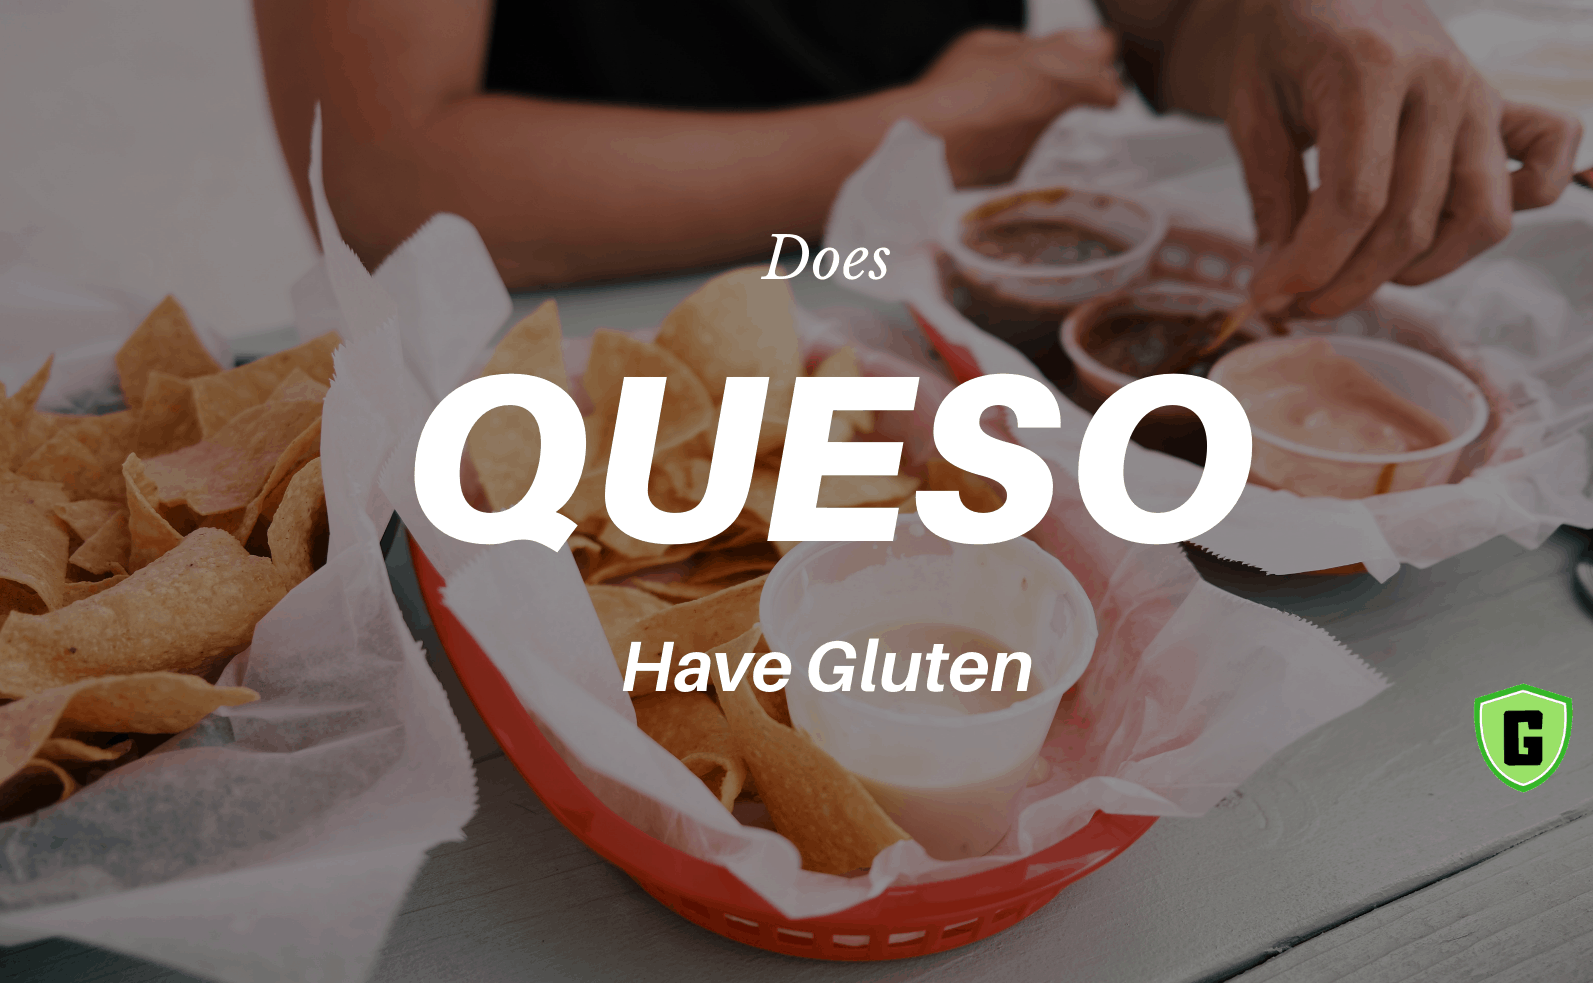 Does Queso have gluten